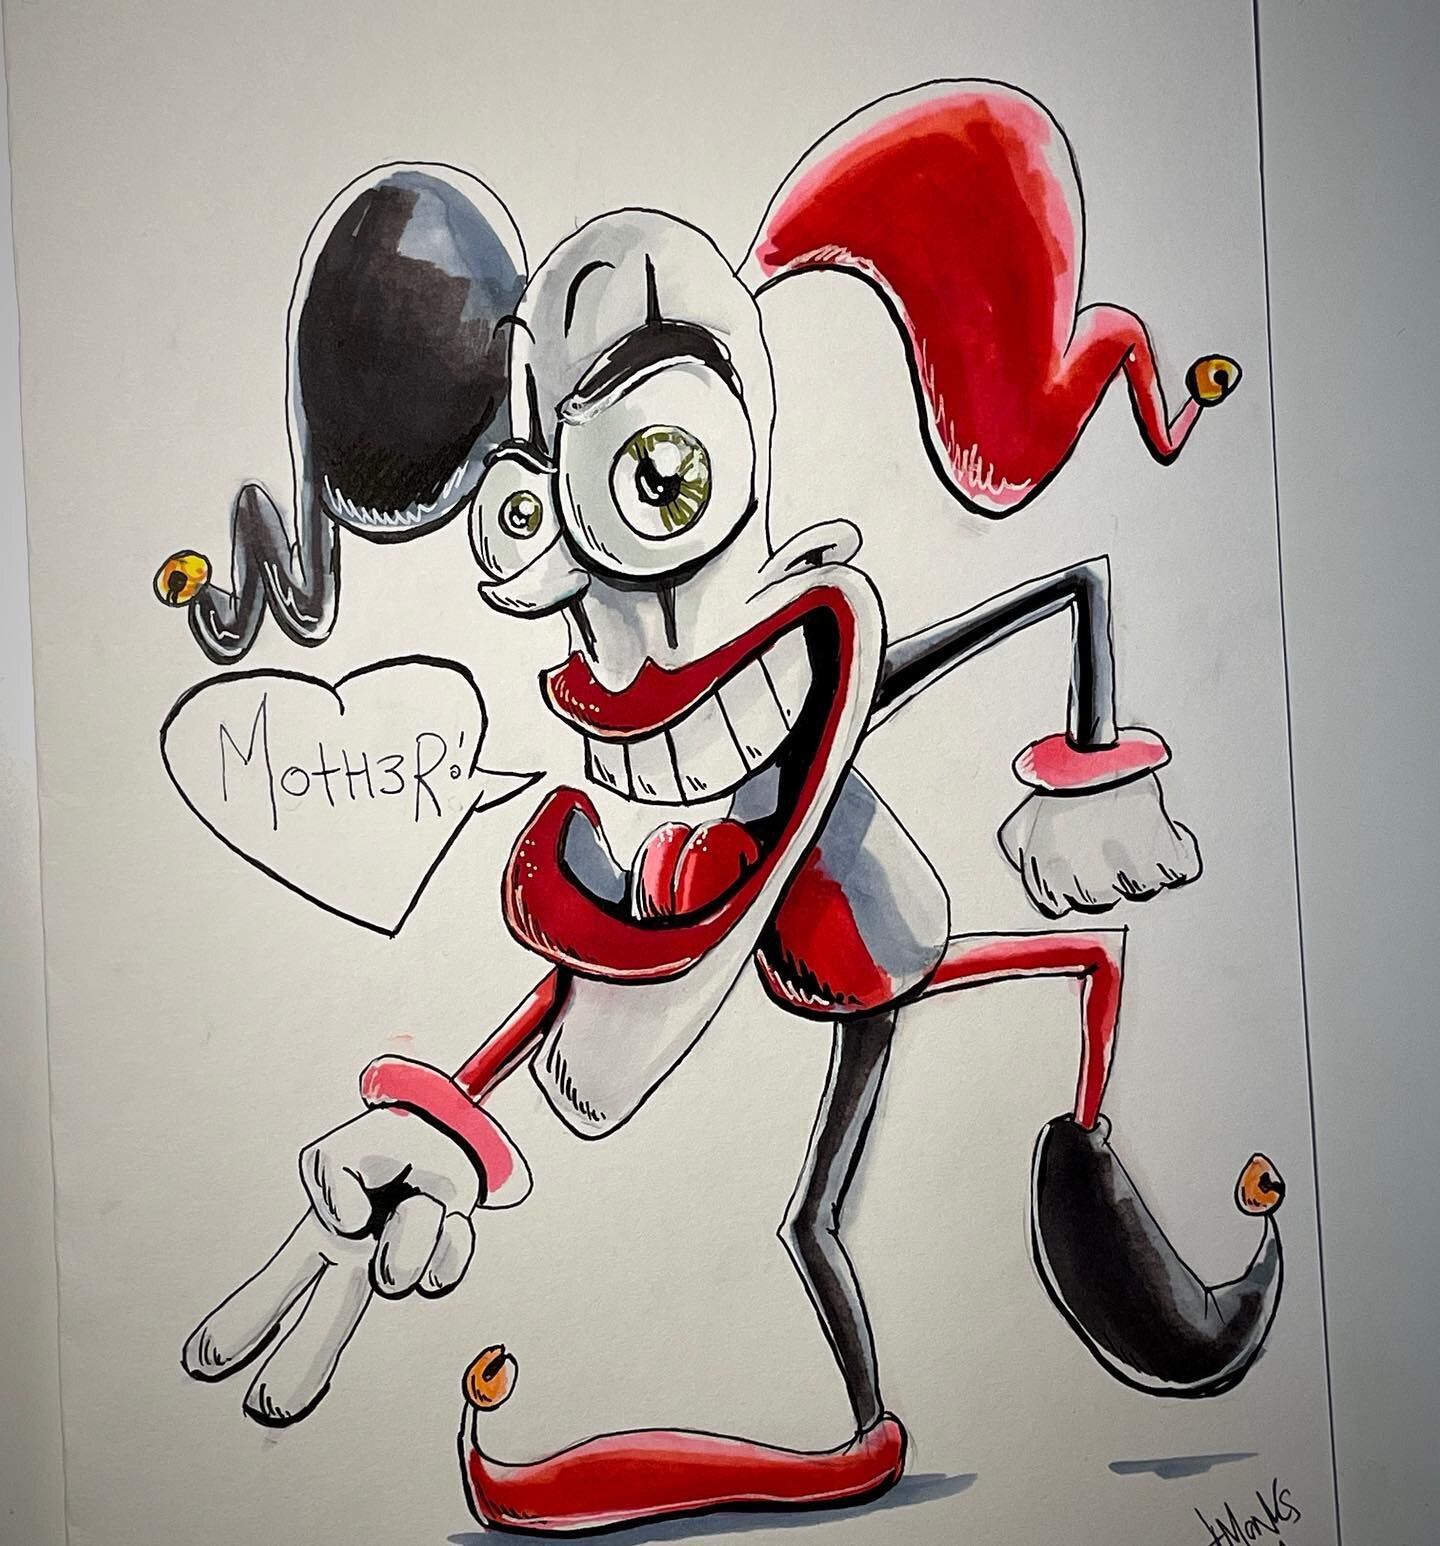 Clowning around in jest for my mother on mothers day. 

#clown #jester #sketch #lowbrow #drawing #ink #marker #eyeball #toon #newschool